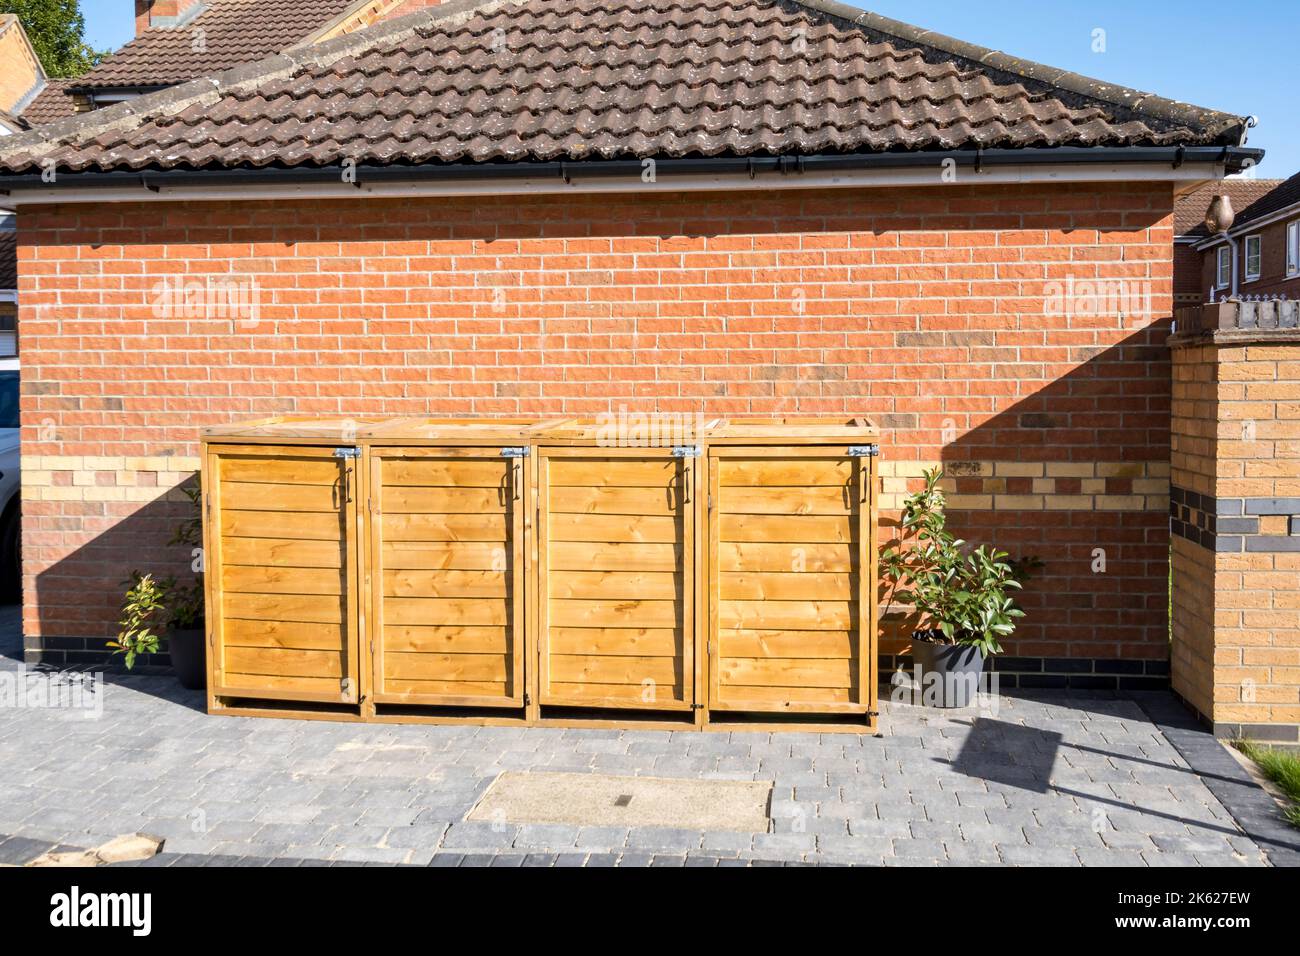 Wood cupboards housing waste bins, Lincolnshire 2022 Stock Photo